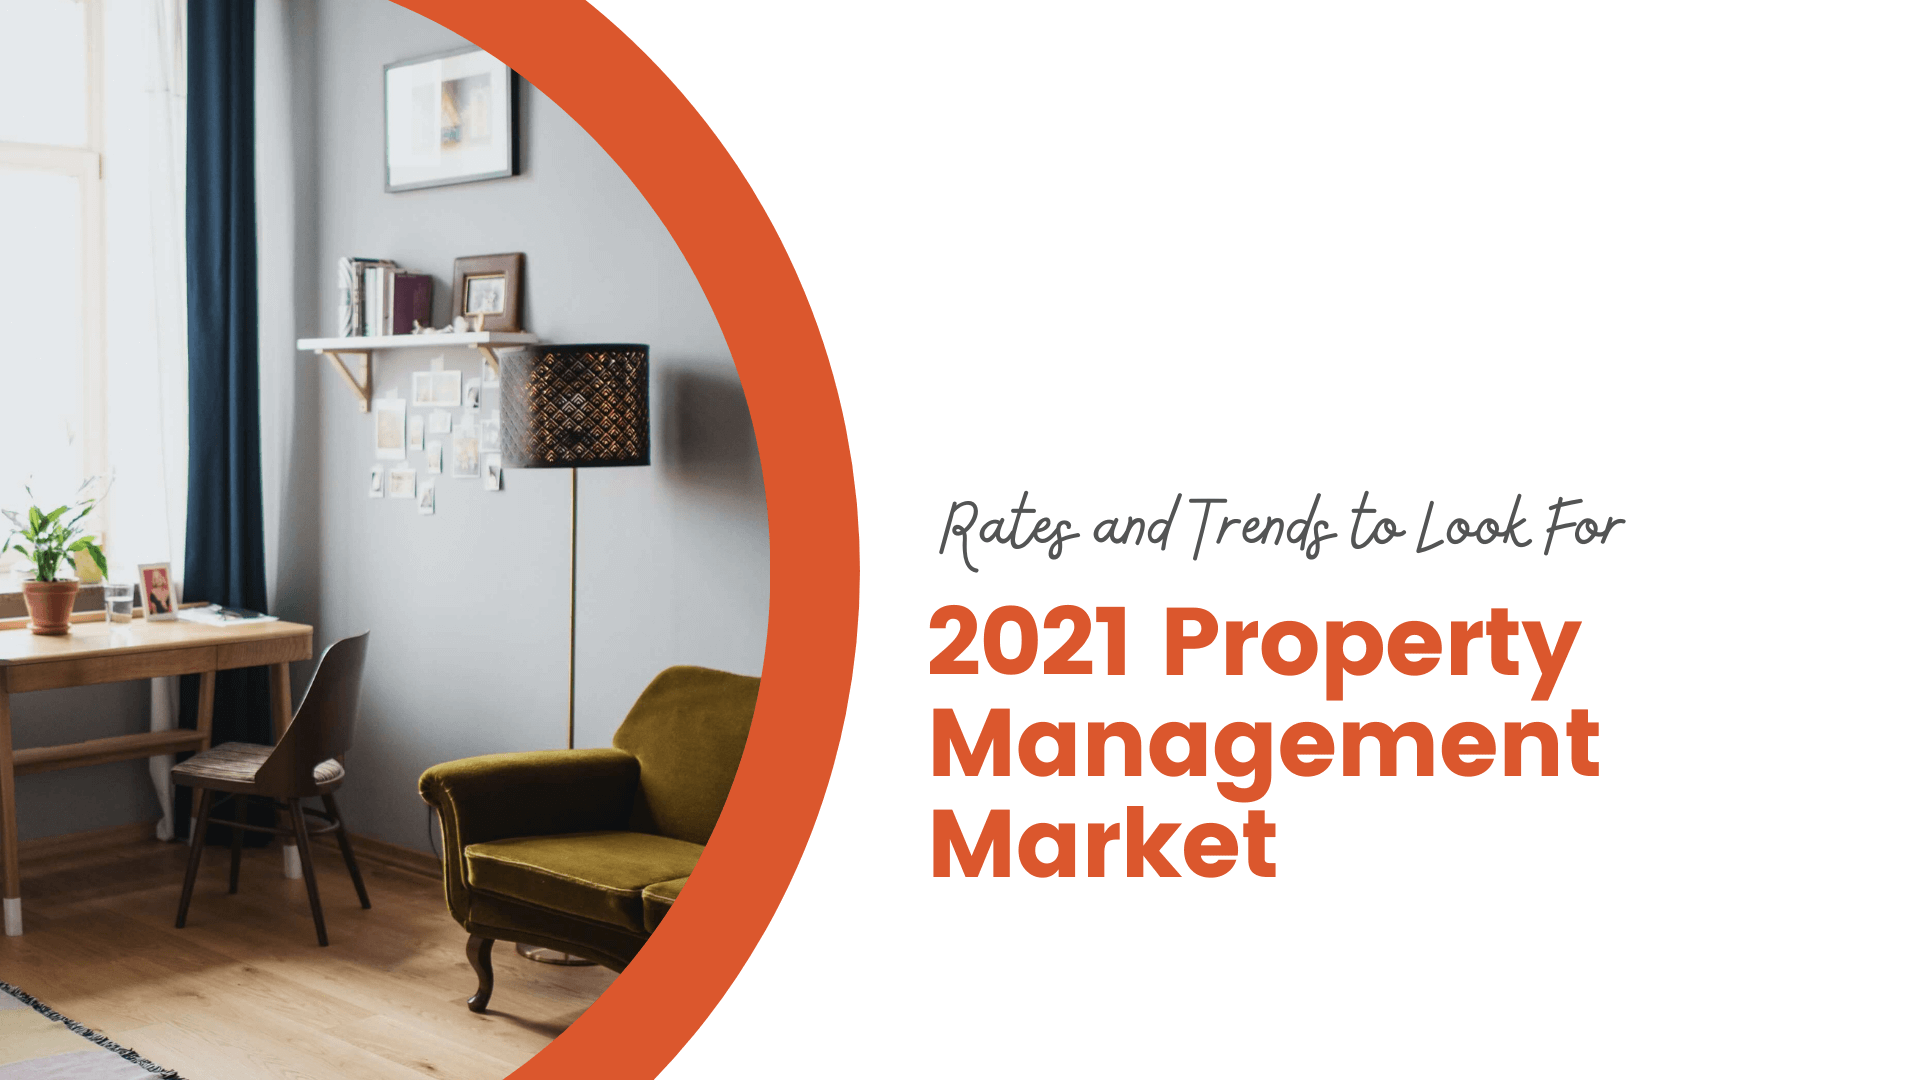 2021 Property Management Market Rates and Trends to Look For